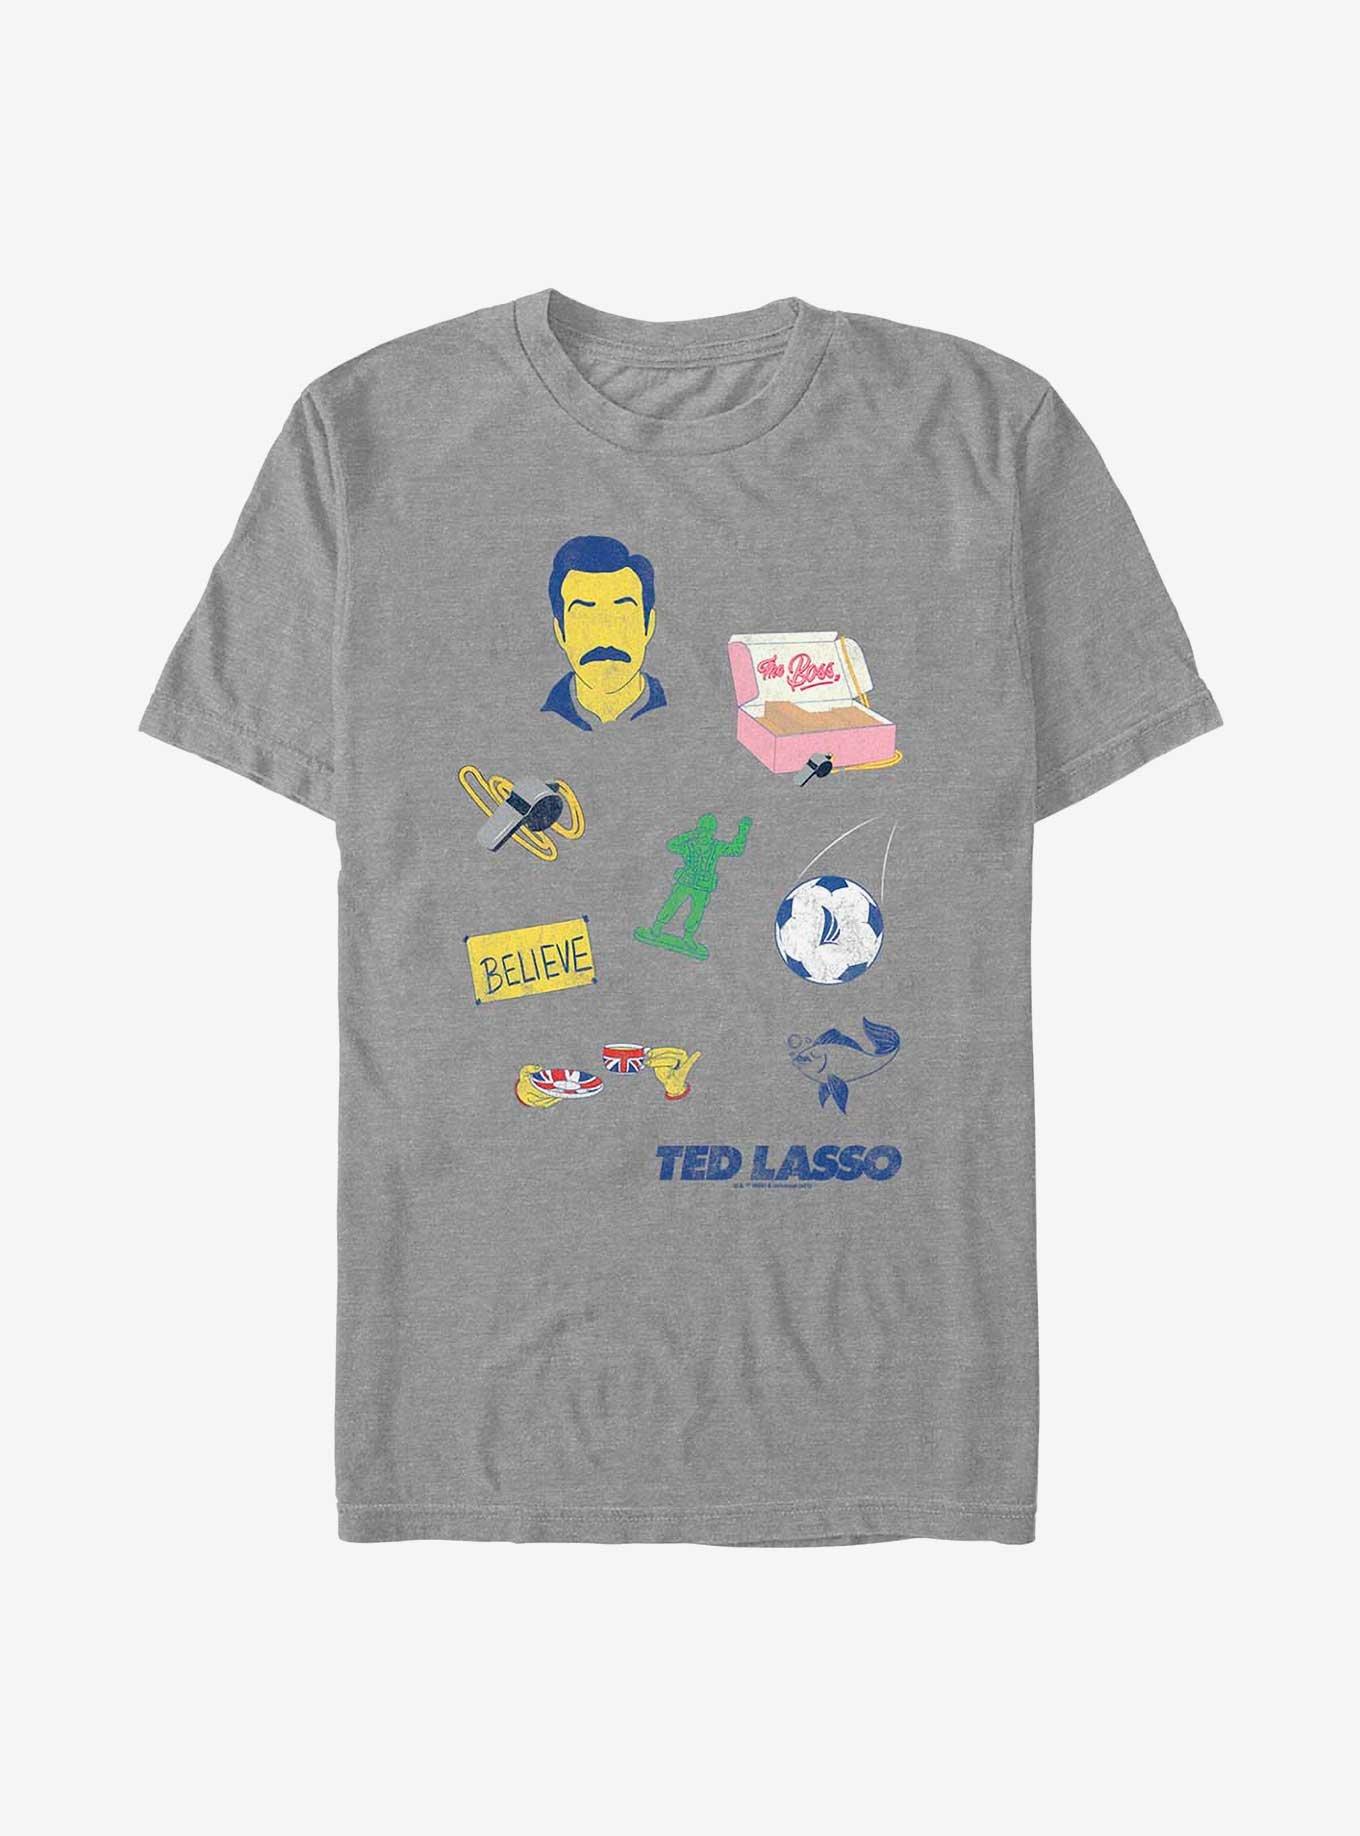 Ted Lasso Icons T-Shirt, DRKGRY HTR, hi-res